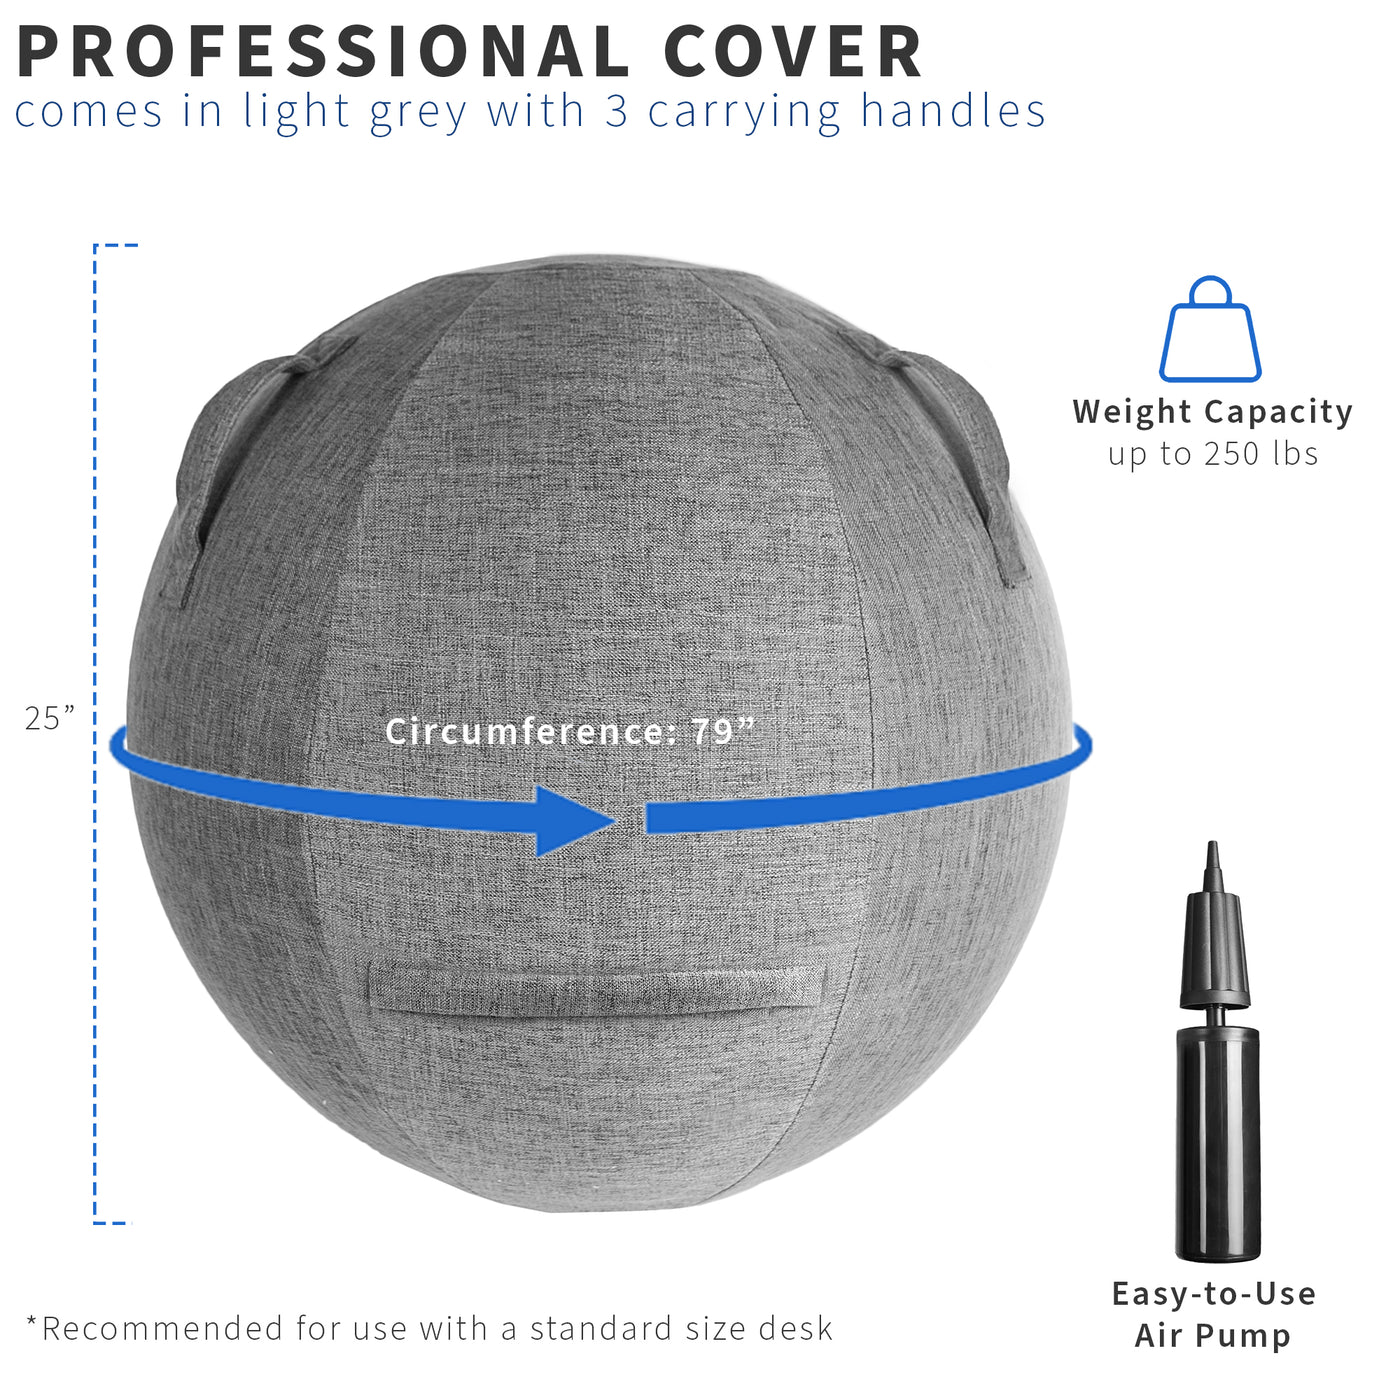 Comfortable sitting yoga ball chair with gray fabric cover including easy use air pump.